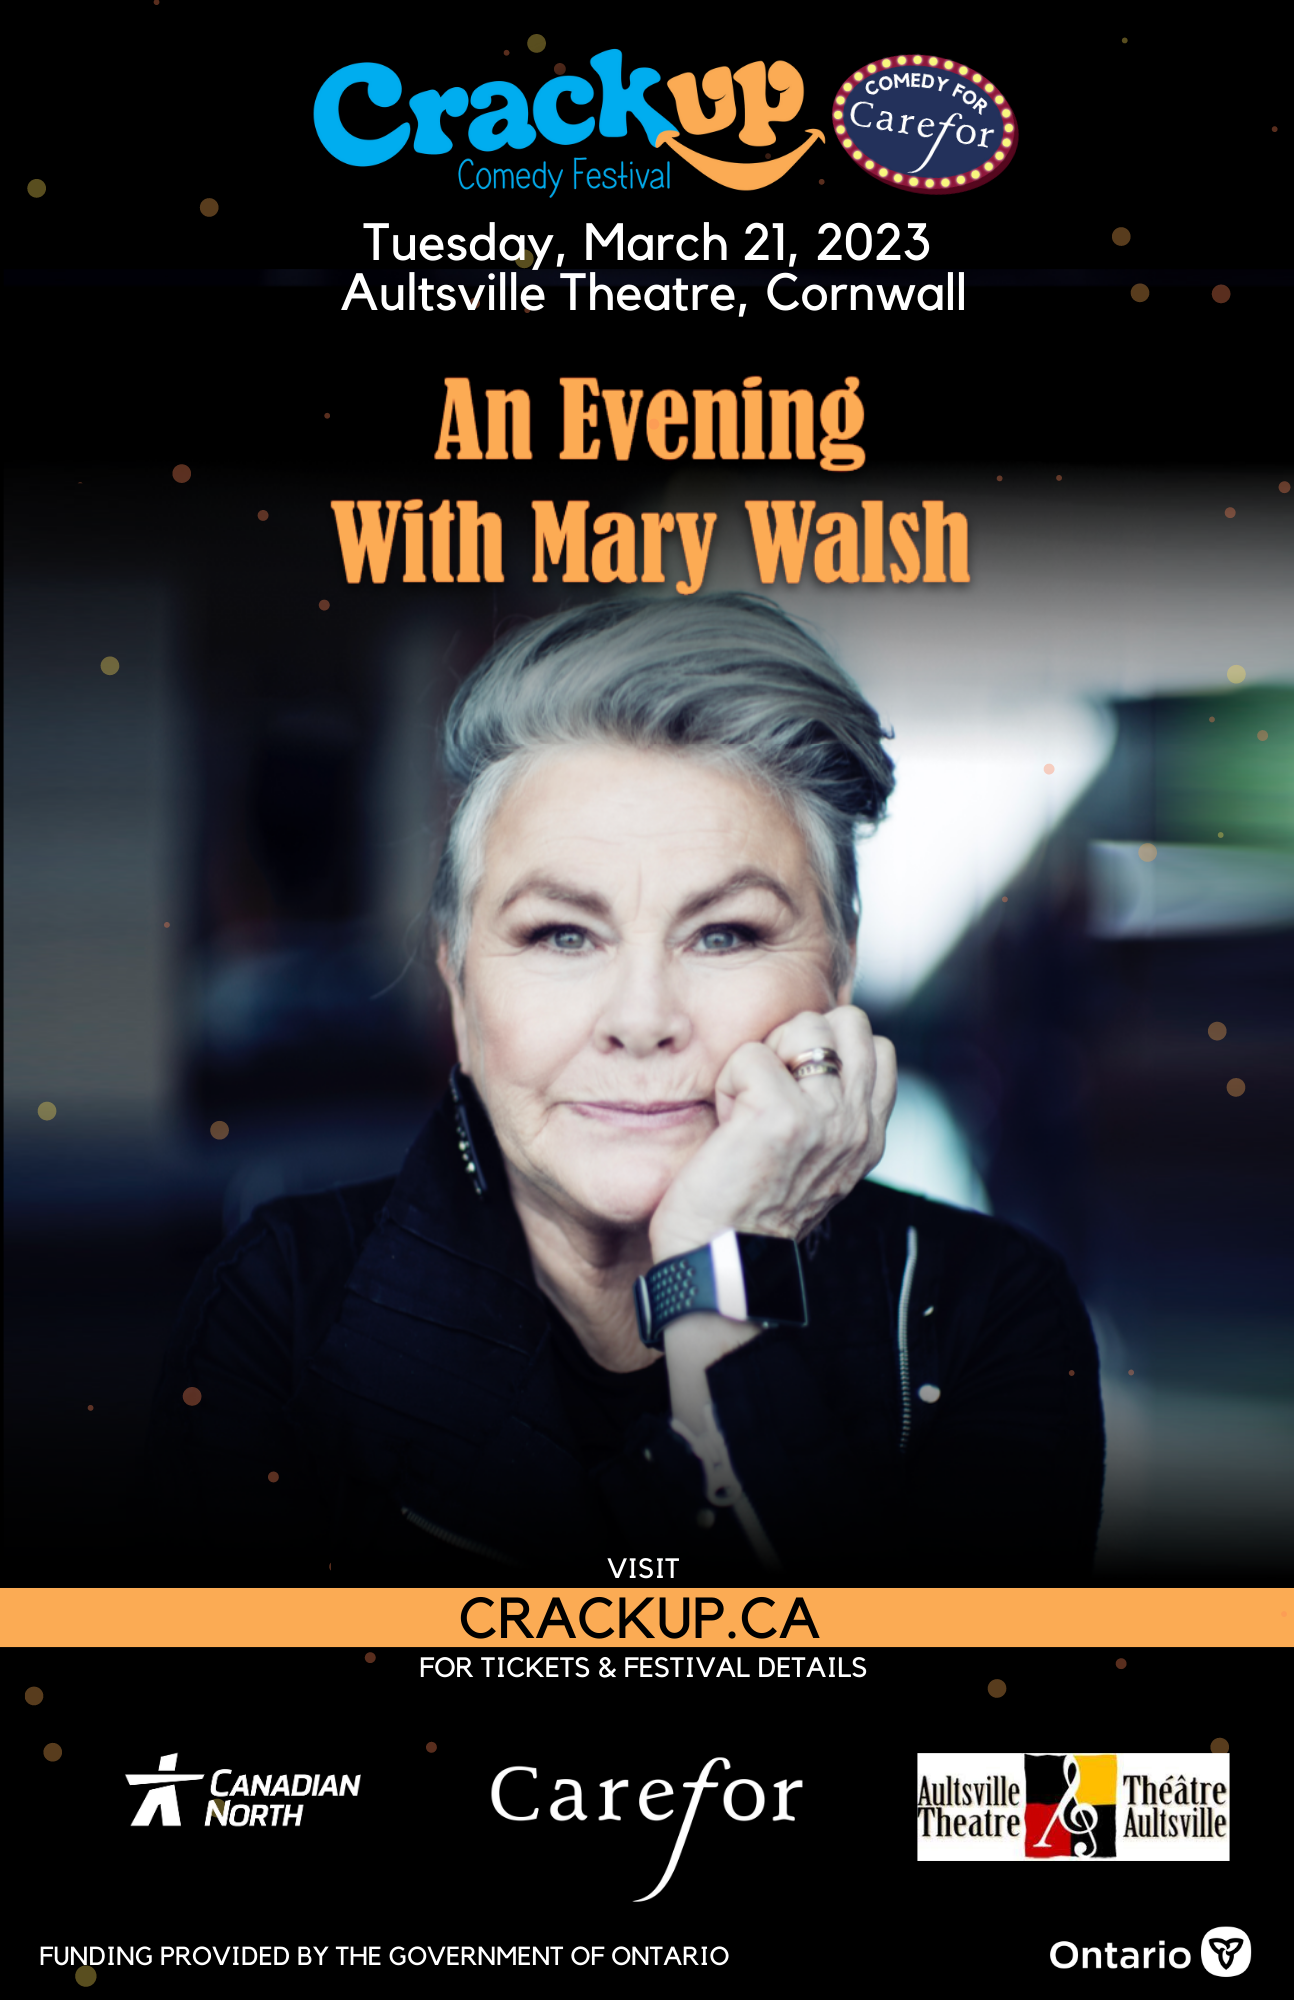 An Evening with Mary Walsh